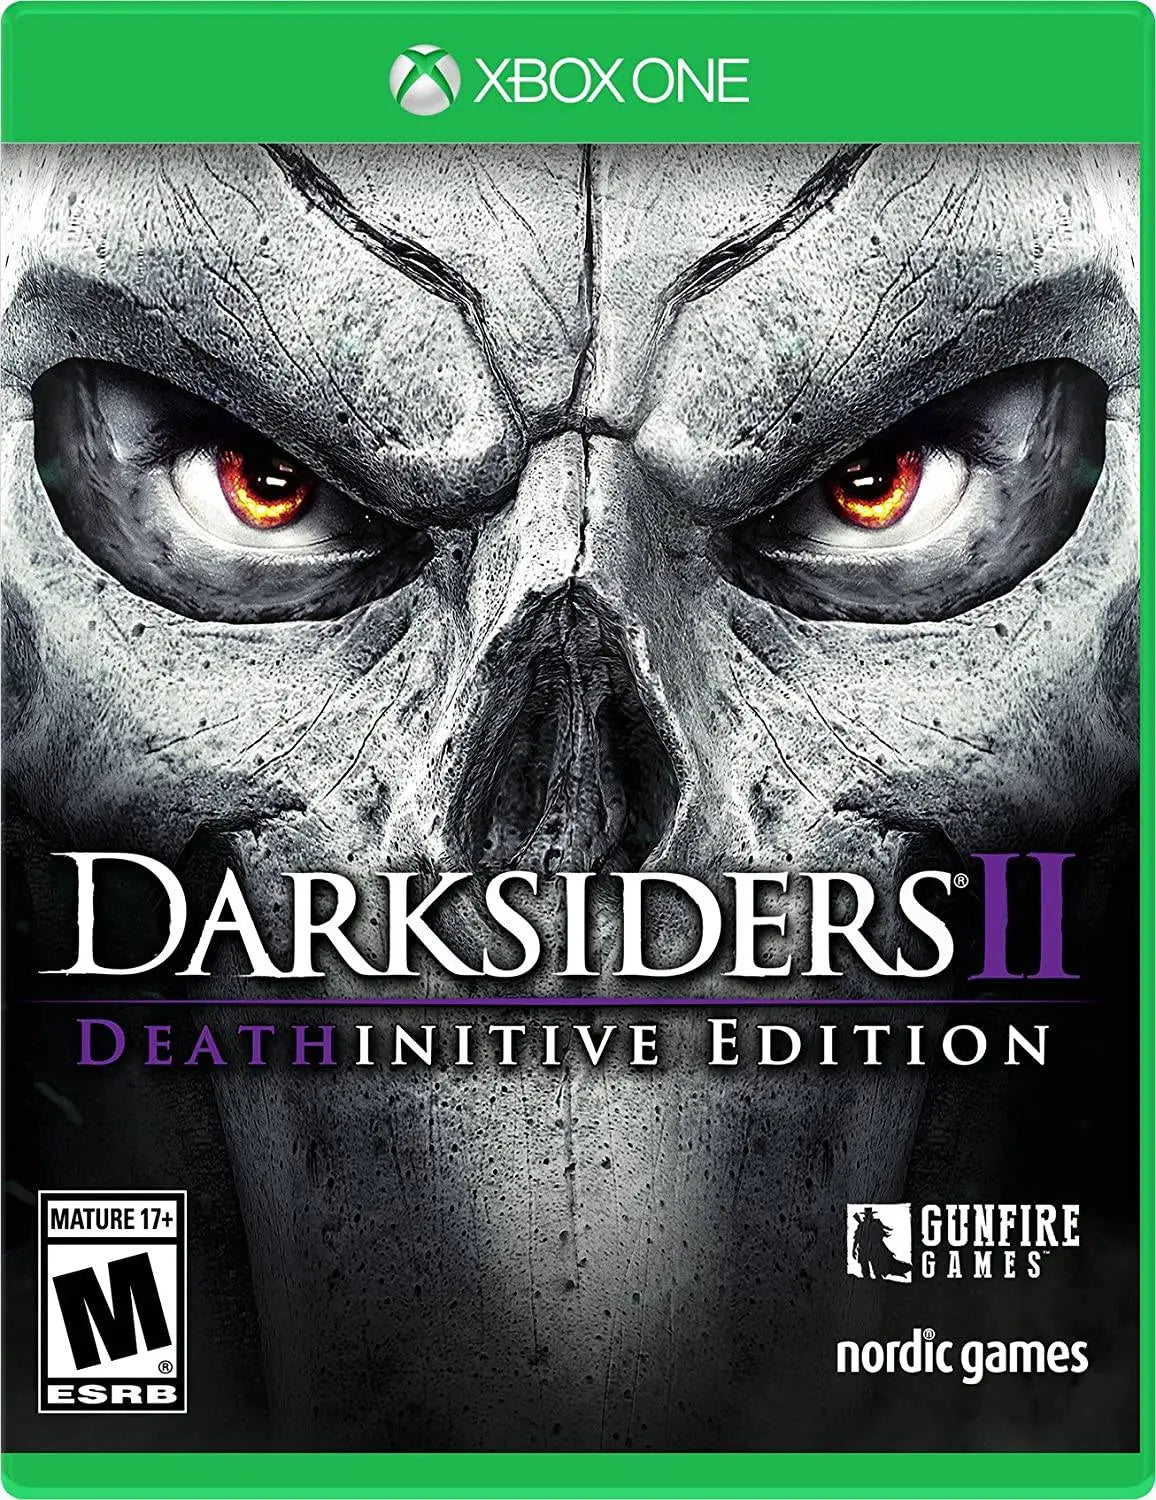 Darksiders 2 - Deathinitive Edition - Xbox One King Gaming